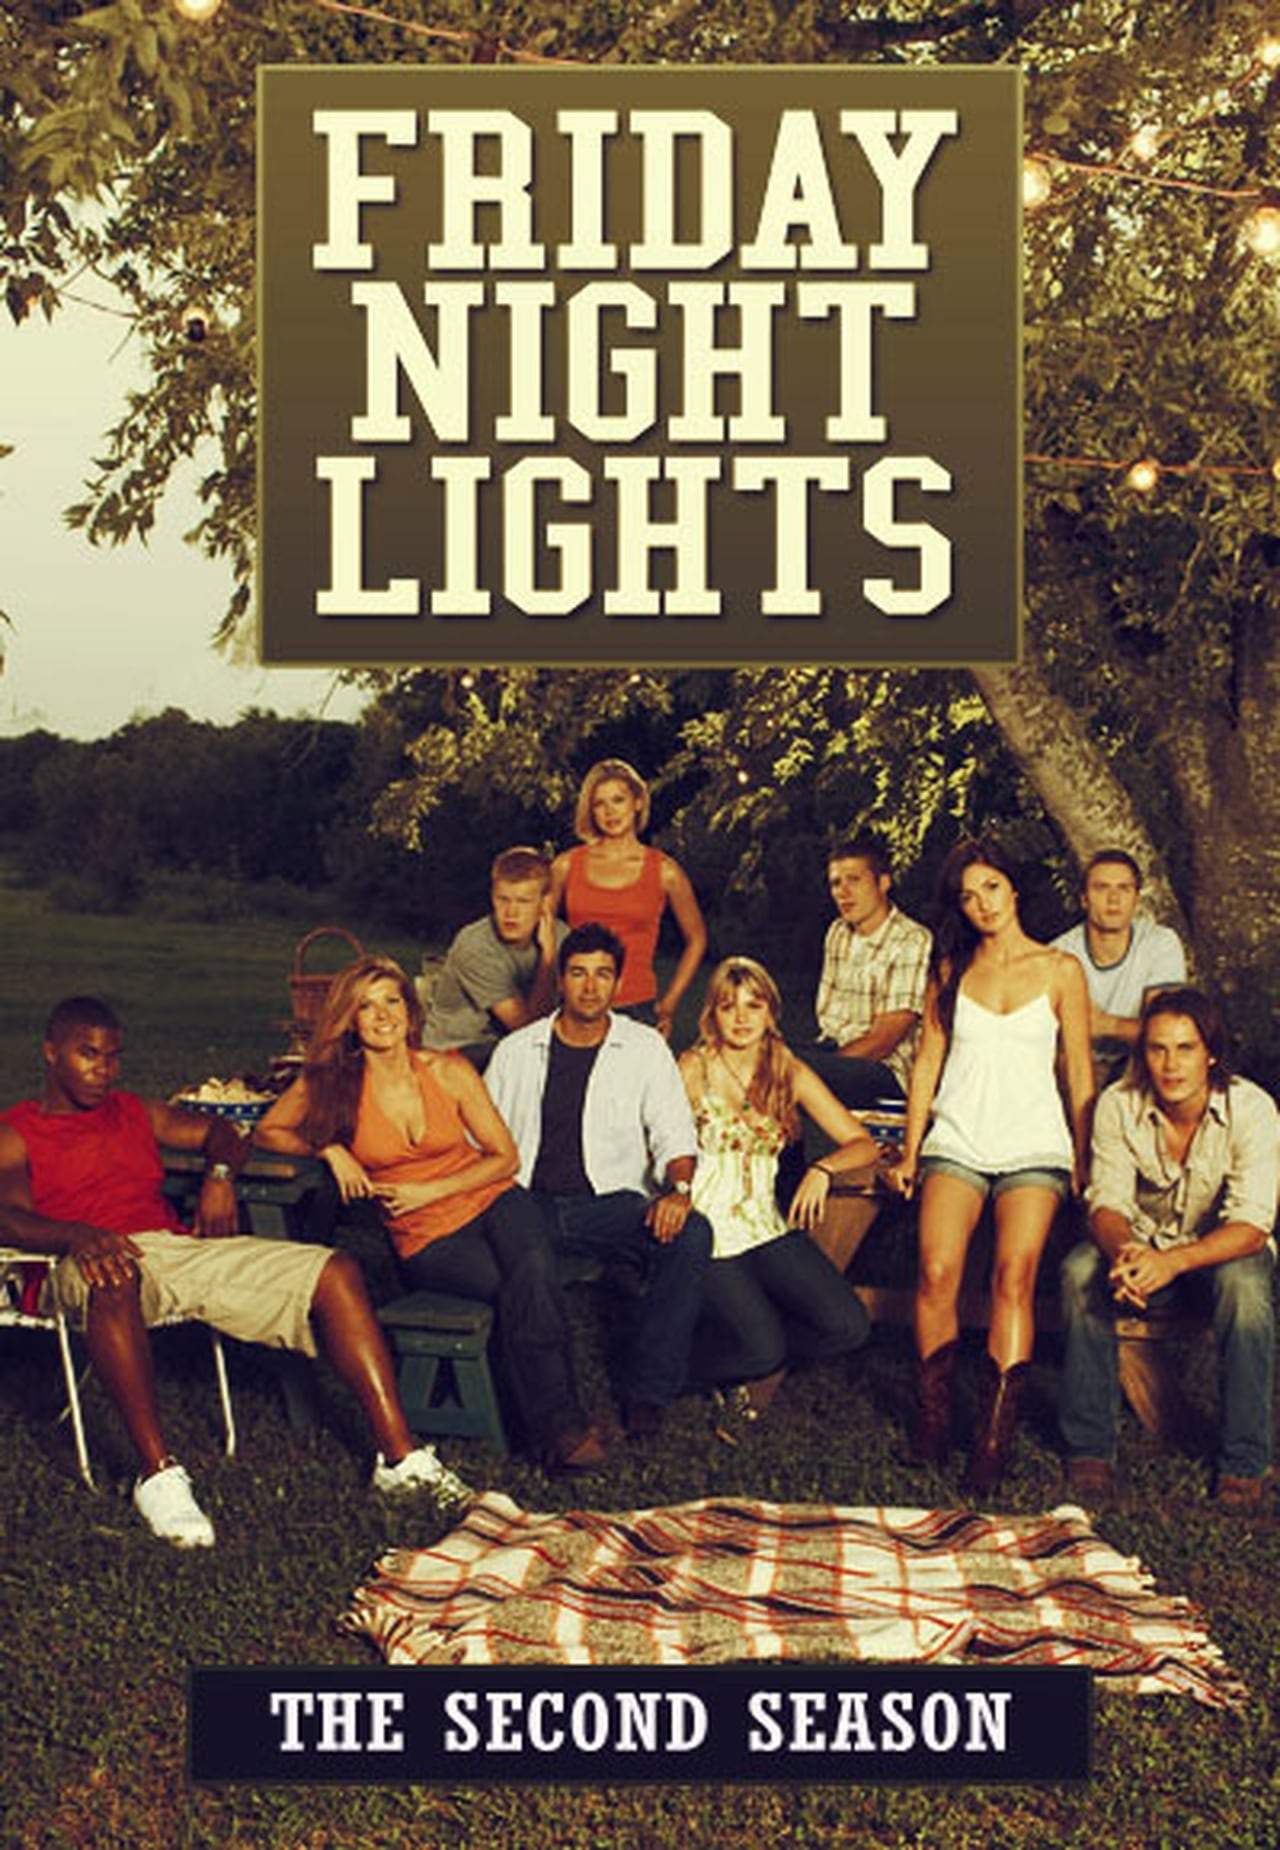 Friday Night Lights Season 2 - Watch full episodes free online at Teatv - How Many Episodes Are In Friday Night Lights